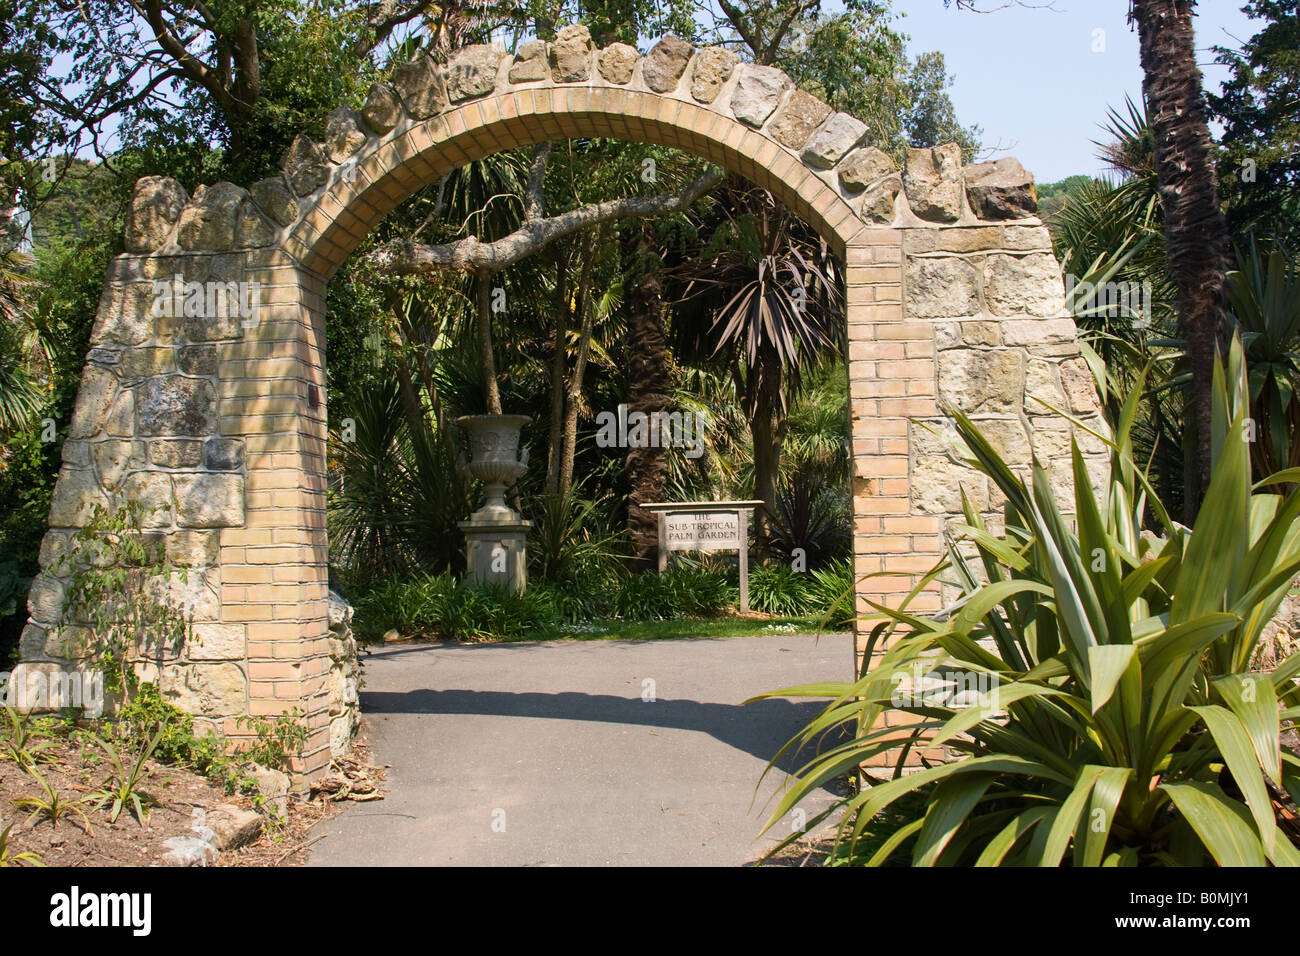 Entrance to the Sub-tropical Palm Garden at Ventnor Botanic Gardens, Isle of Wight, England, UK Stock Photo